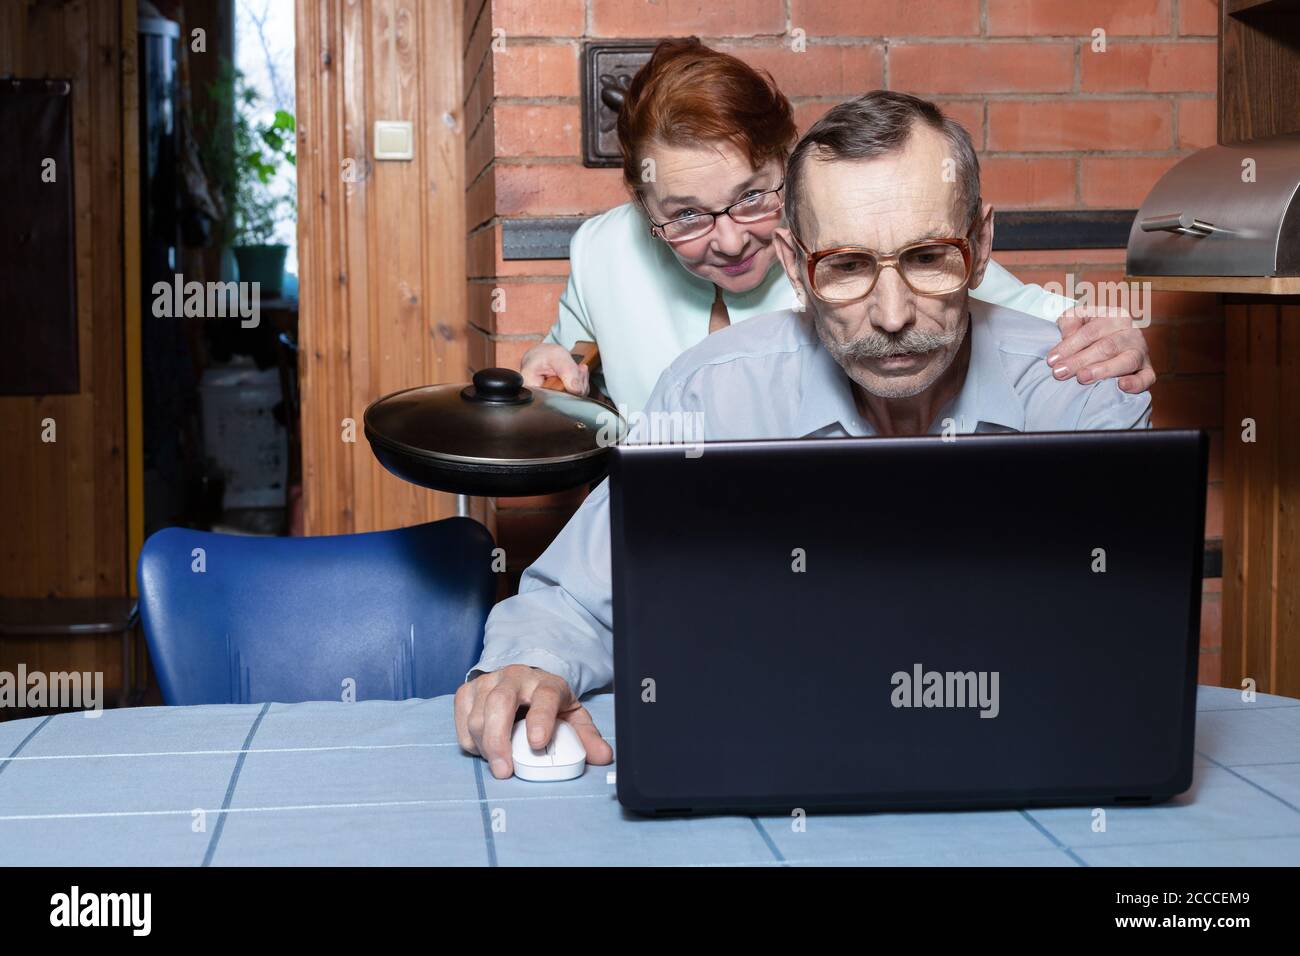 Family problems due to computer. Elderly couple in the kitchen, senior man uses a laptop Stock Photo